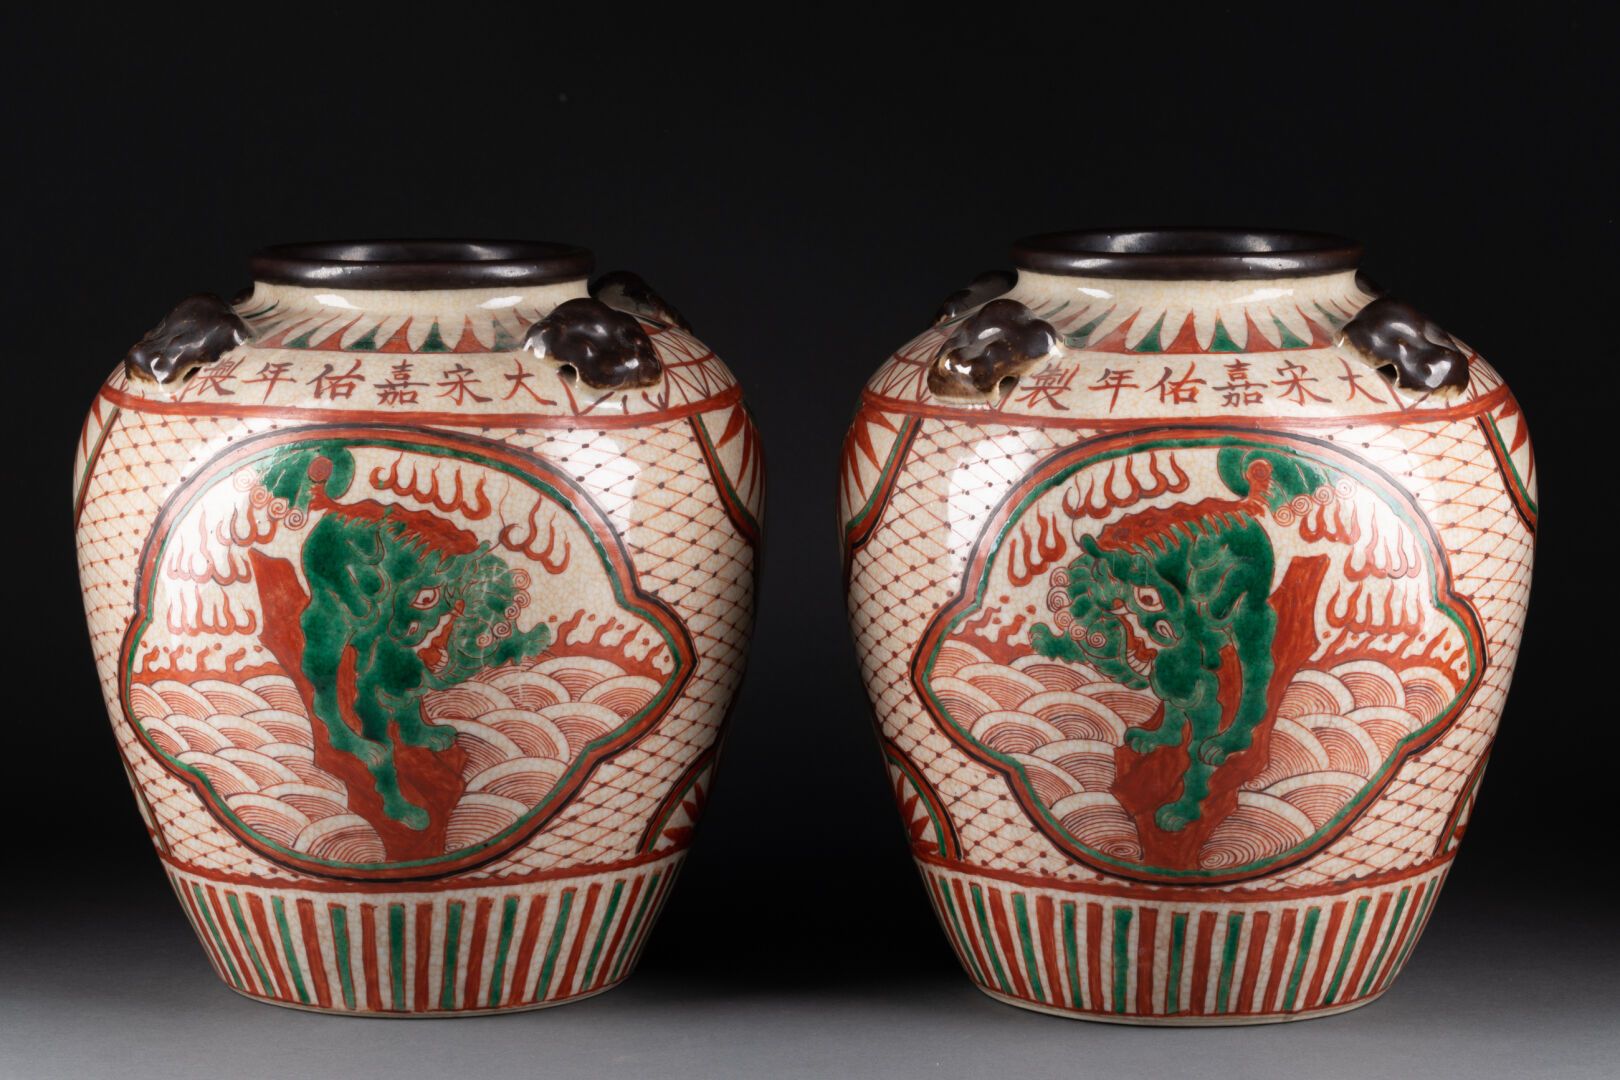 CHINE - Début XXe siècle Pair of JARS decorated in poly-lobed cartouches with do&hellip;